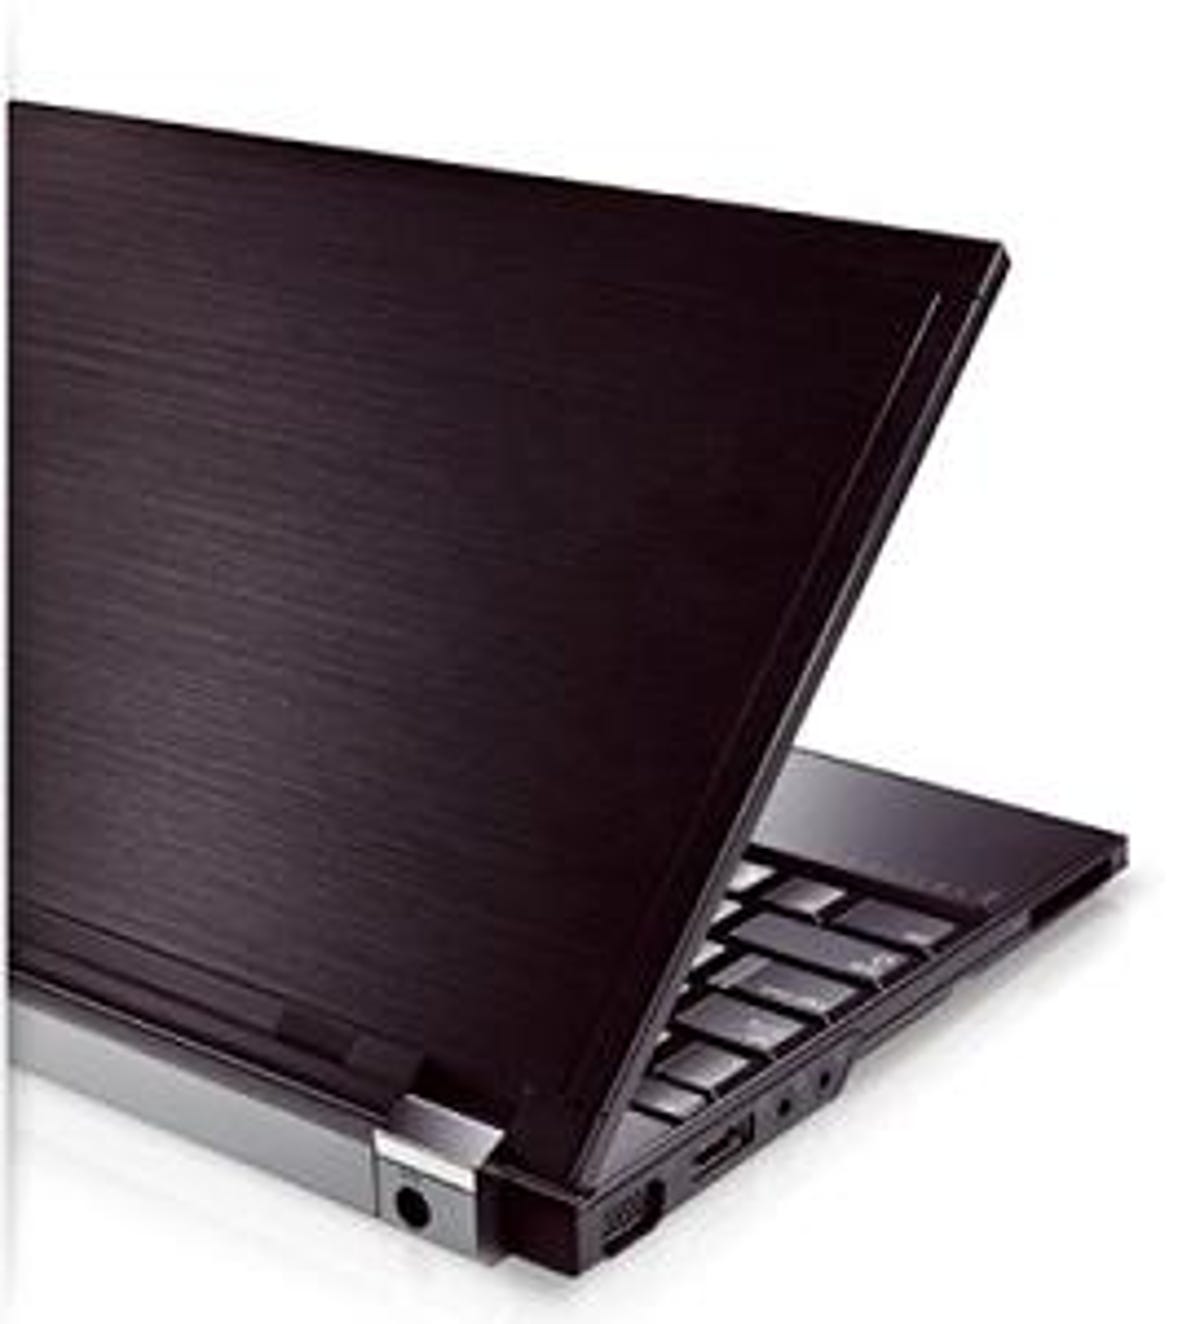 Dell E4200 ultraportable can be configured with 128GB SSD